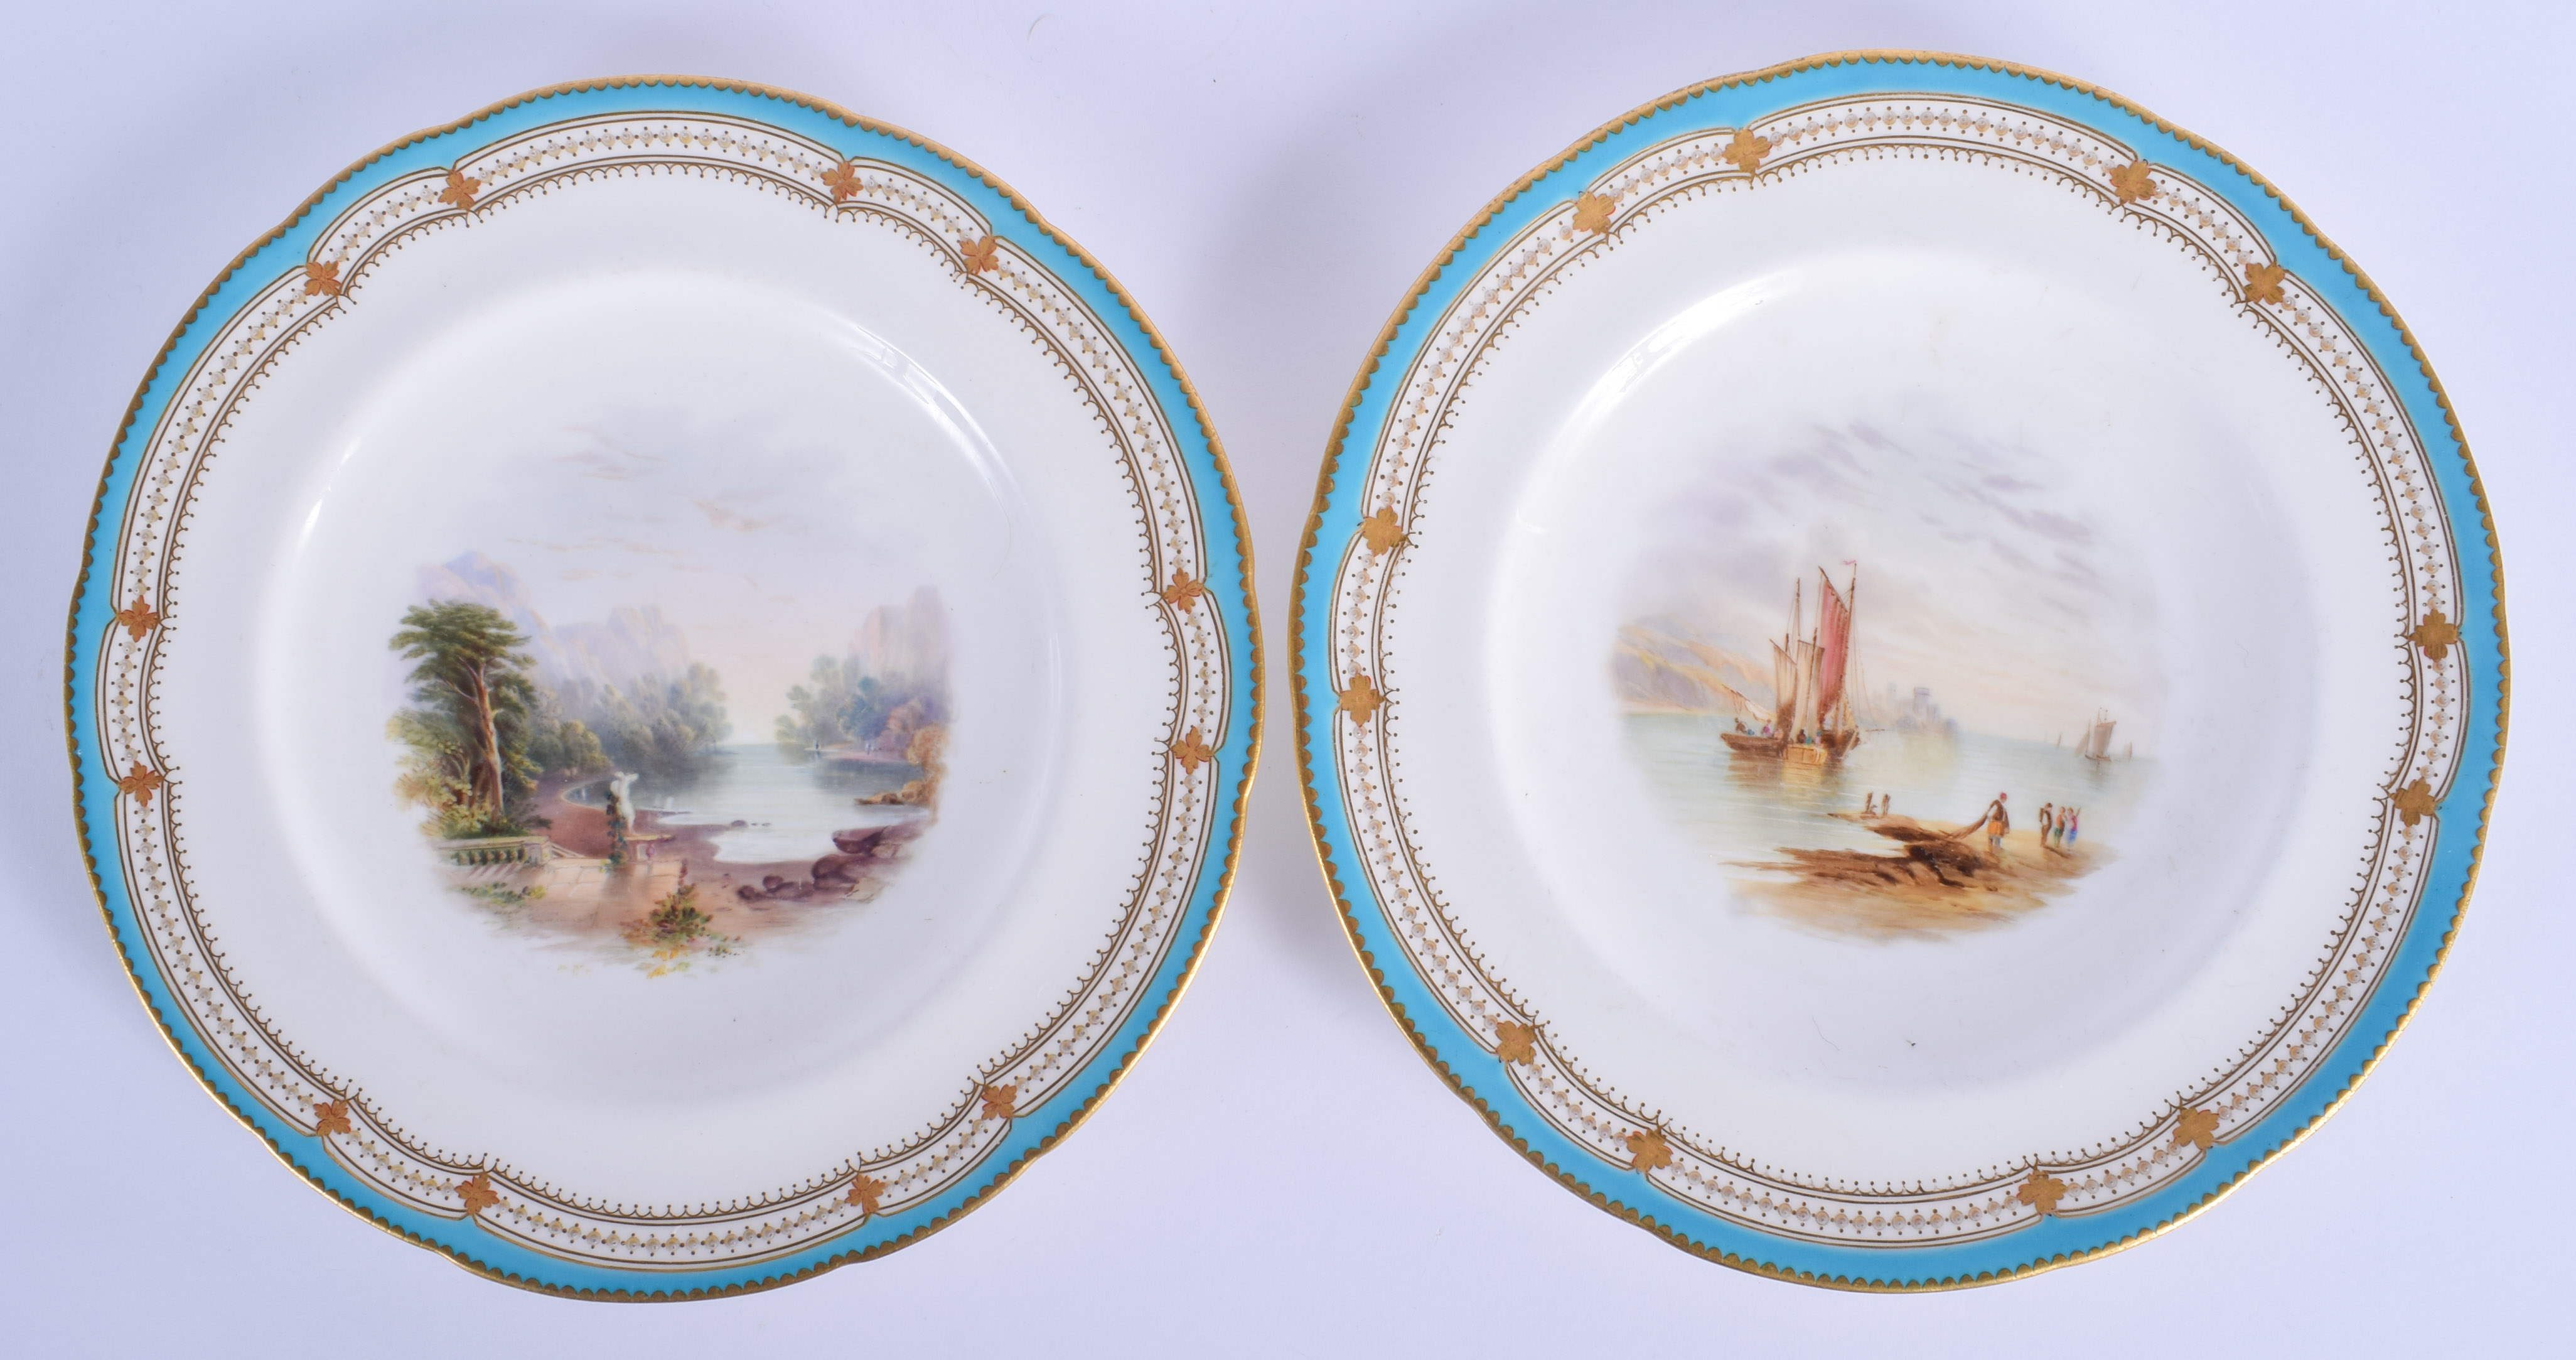 19th c. Minton pair of plates each painted with watery landscapes under a turquoise and gilt border.